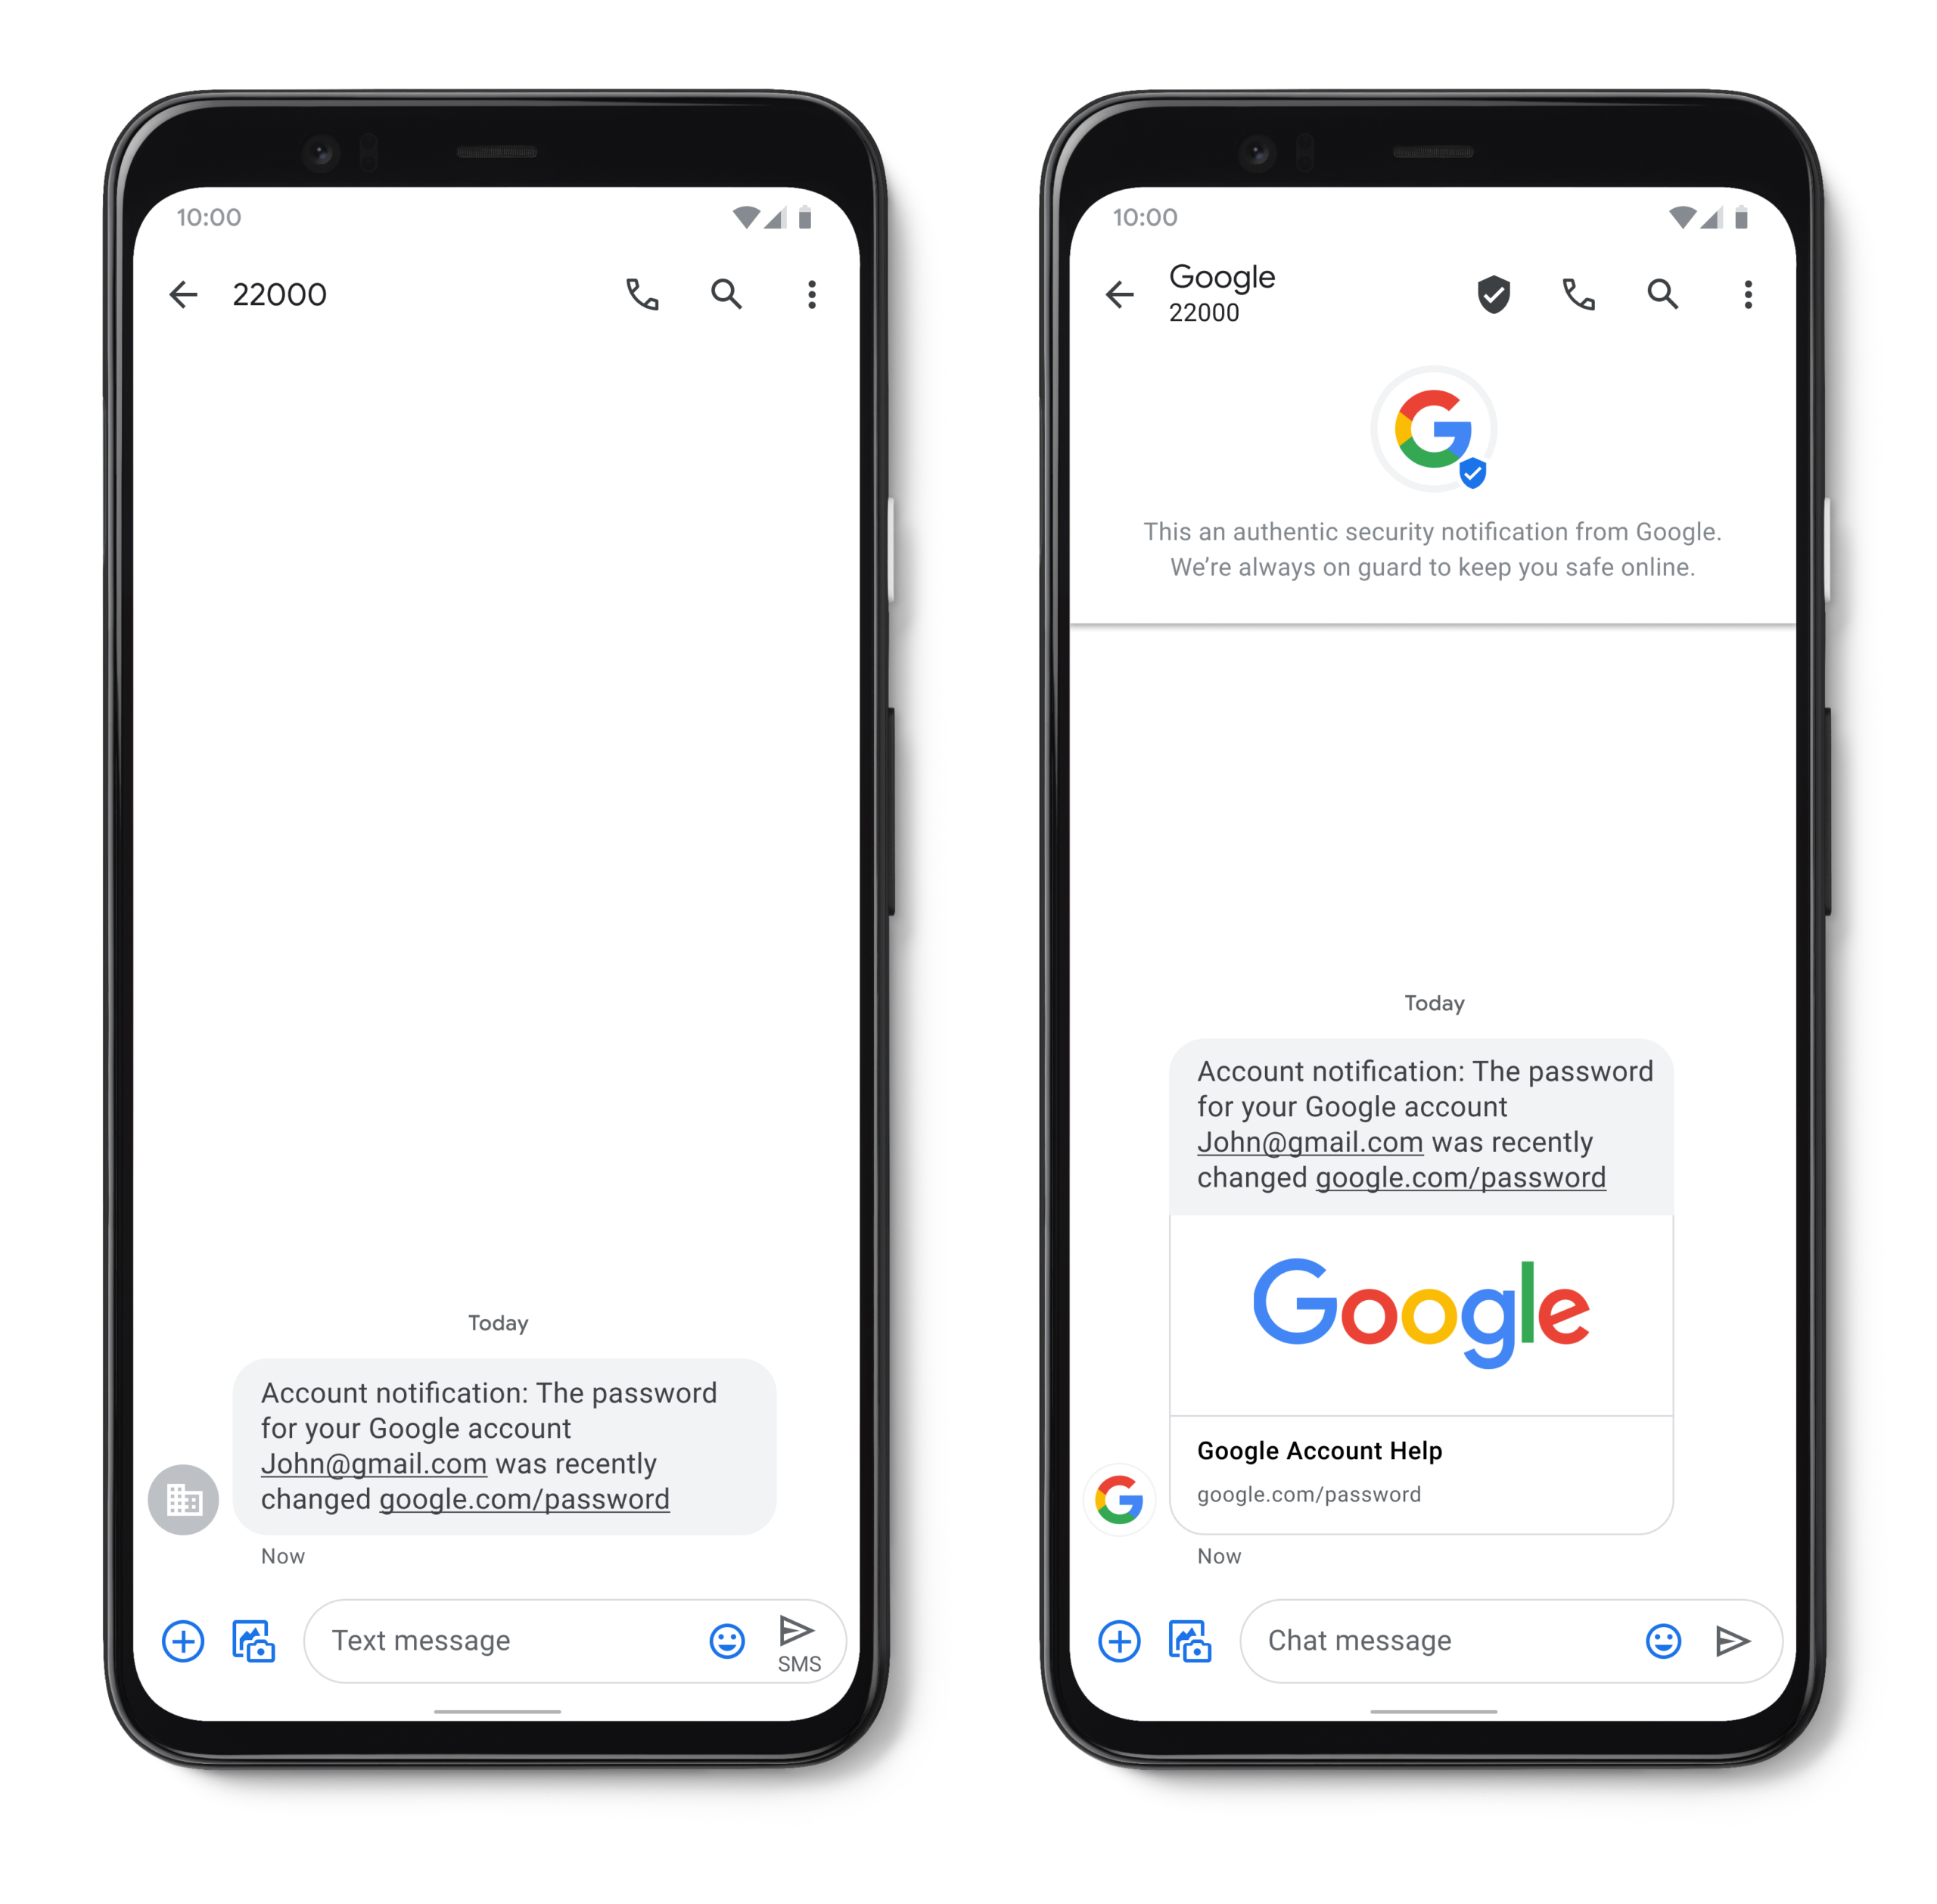 Google Messages rolls out Verified SMS to protect you from spam and